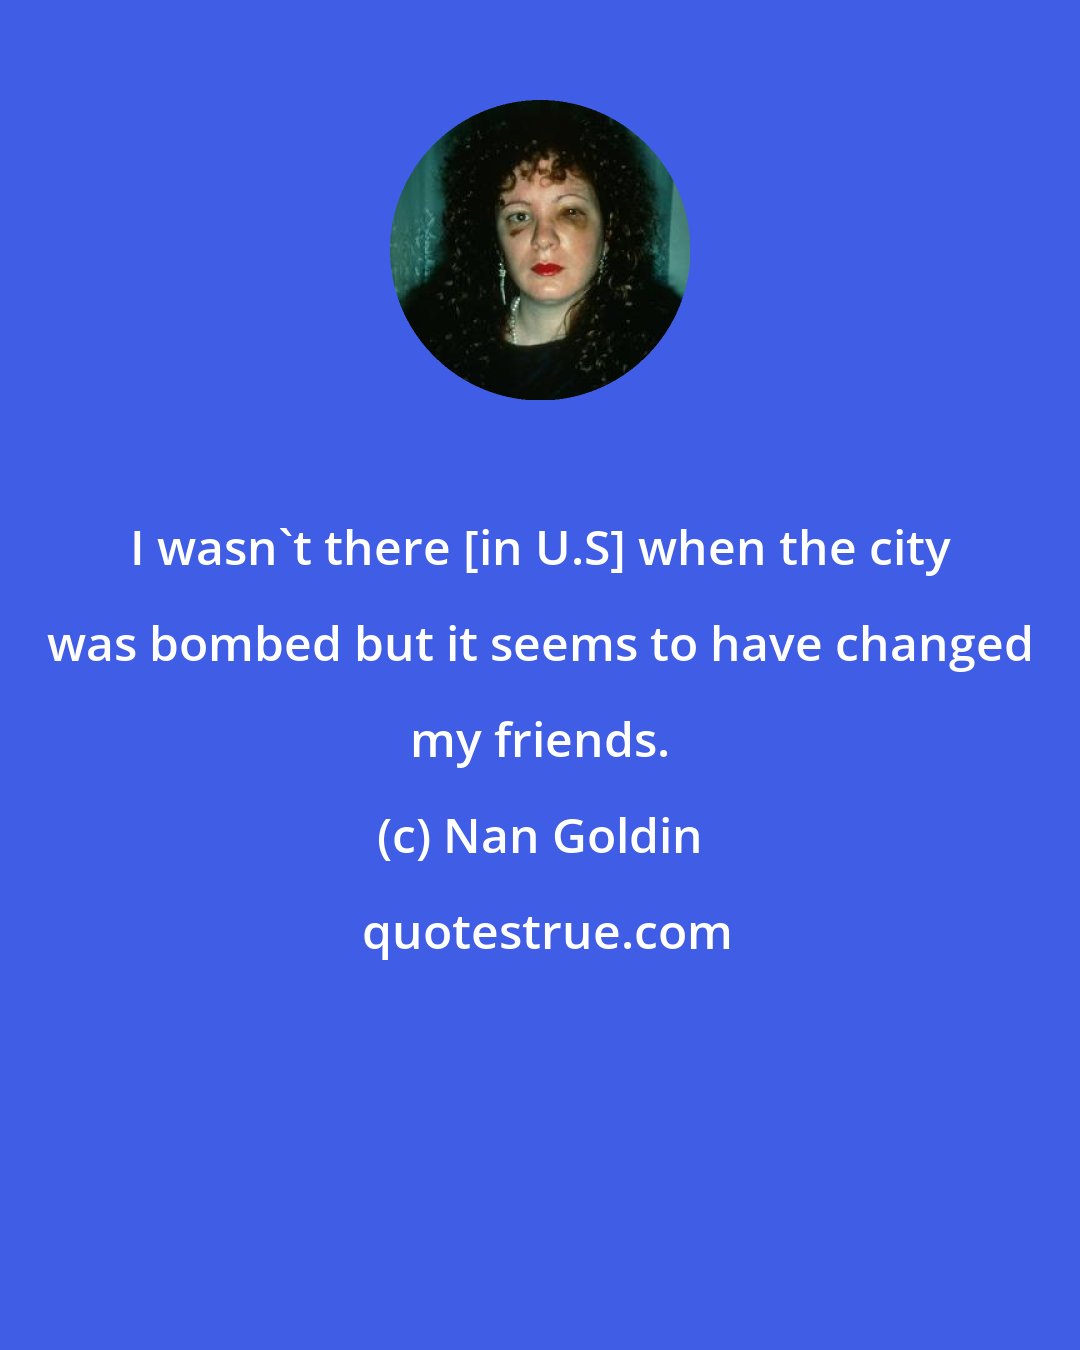 Nan Goldin: I wasn't there [in U.S] when the city was bombed but it seems to have changed my friends.